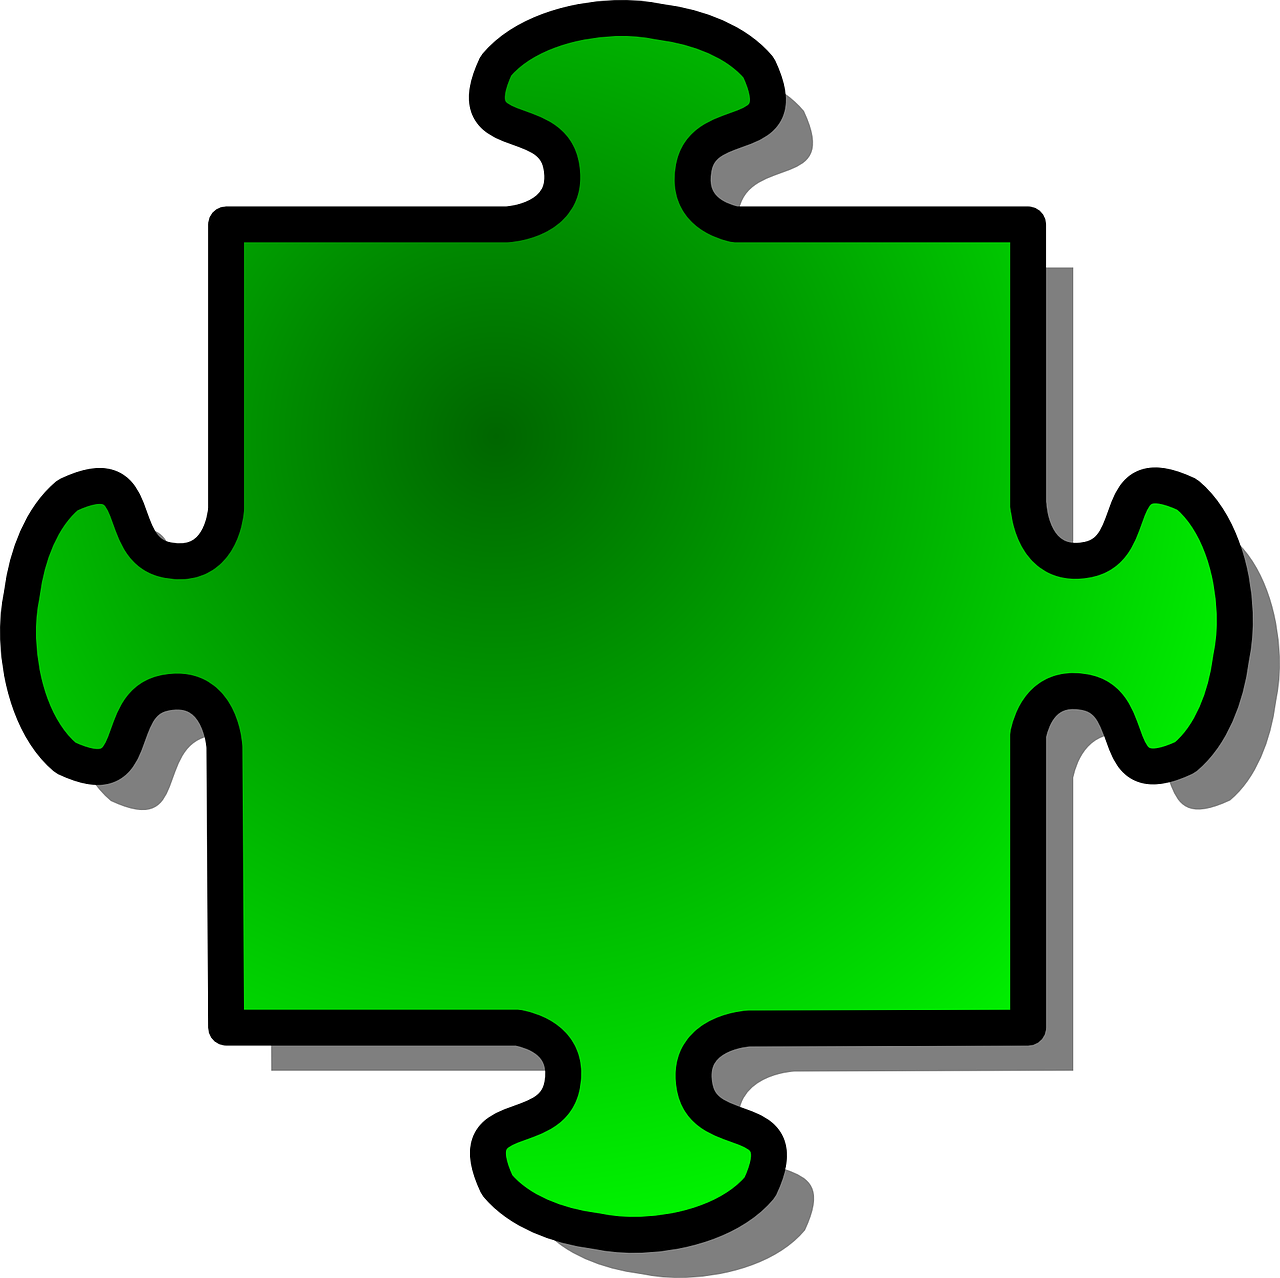 Clker-Free-Vector-Images-jigsaw from pixabay